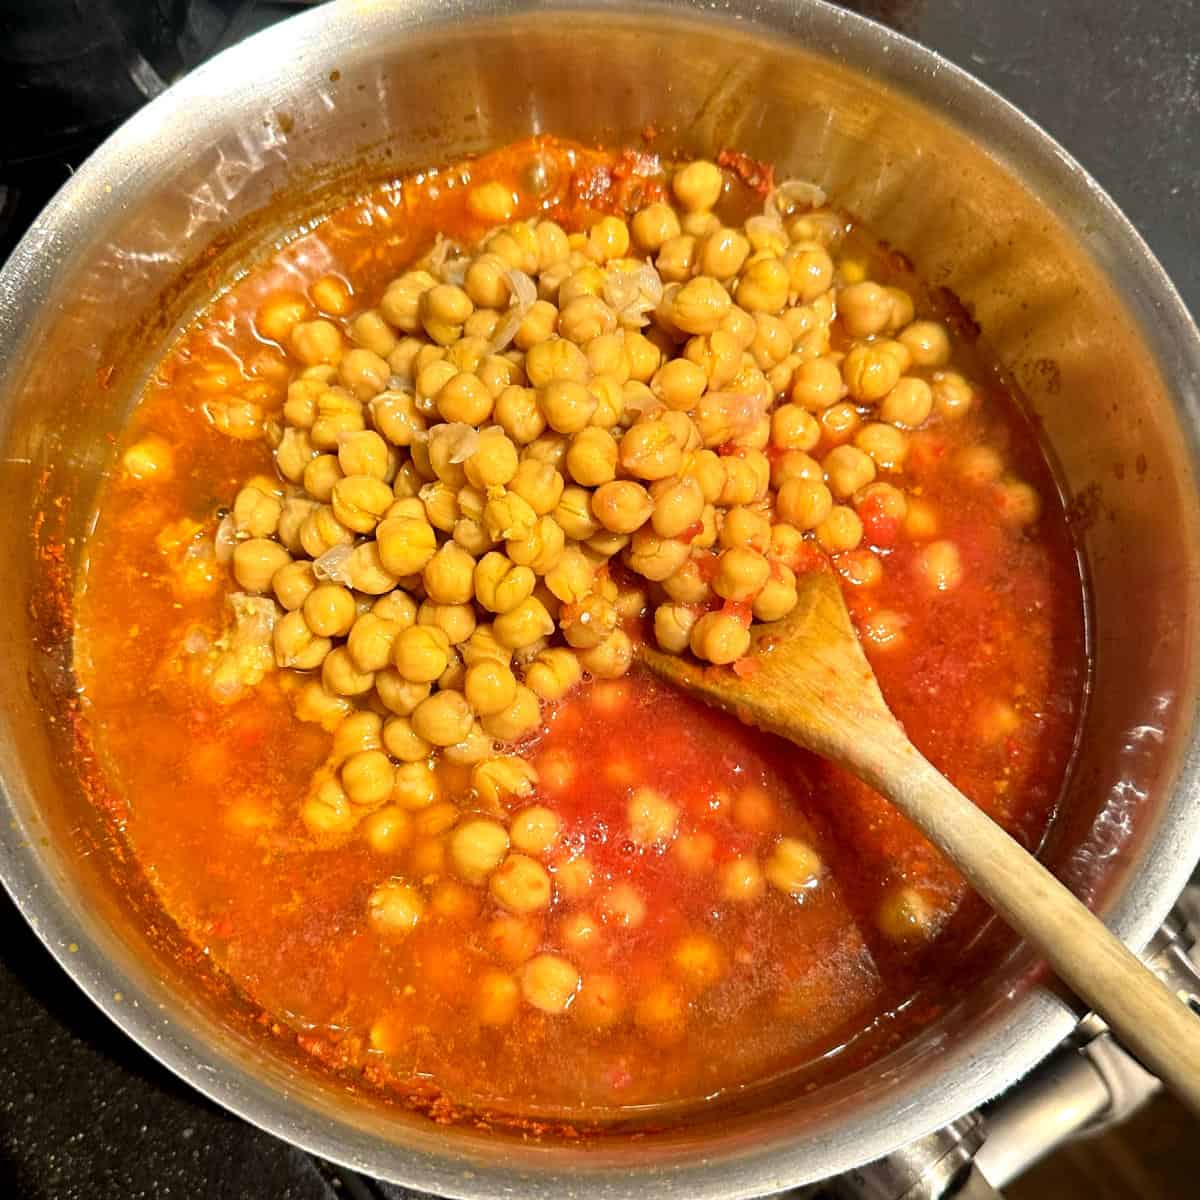 Chickpeas added to pot.